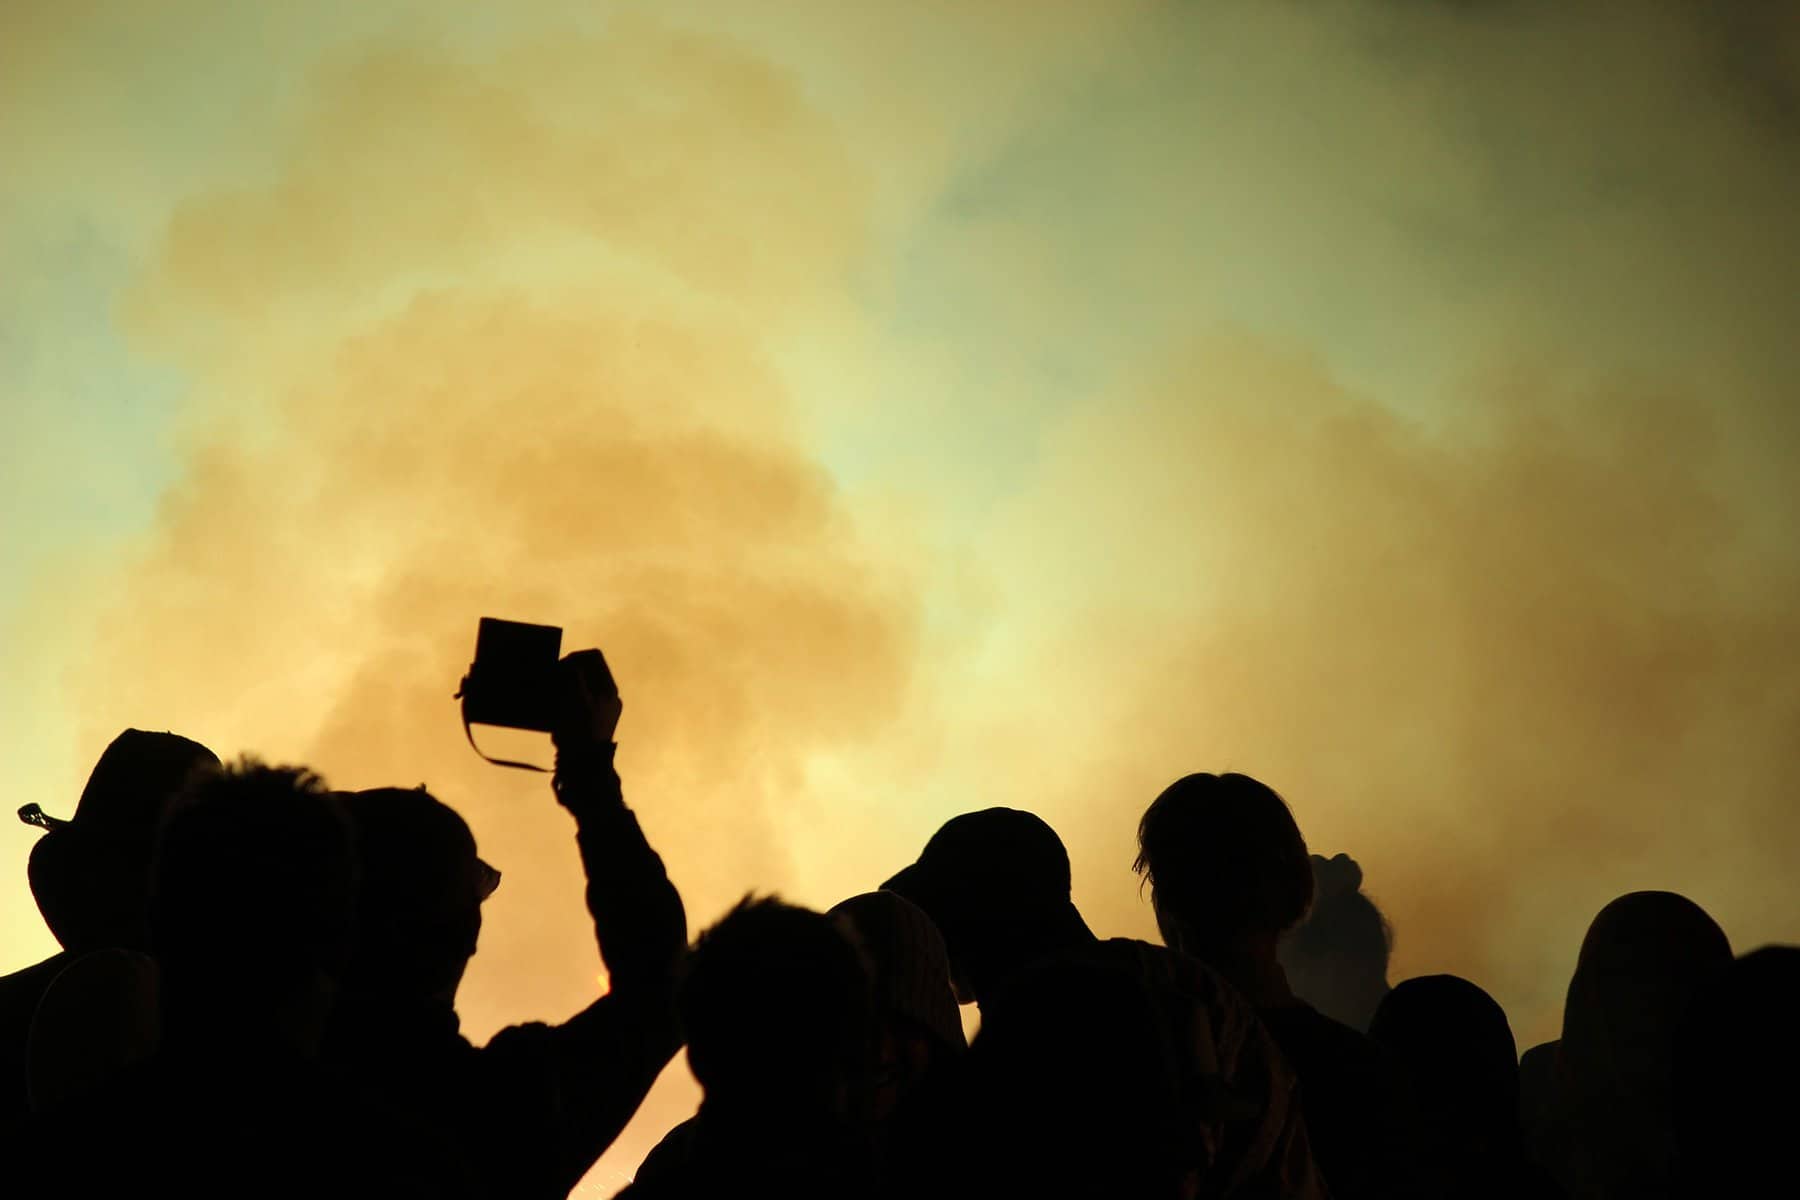 People are seen in silhouette with artificial smoke behind them.